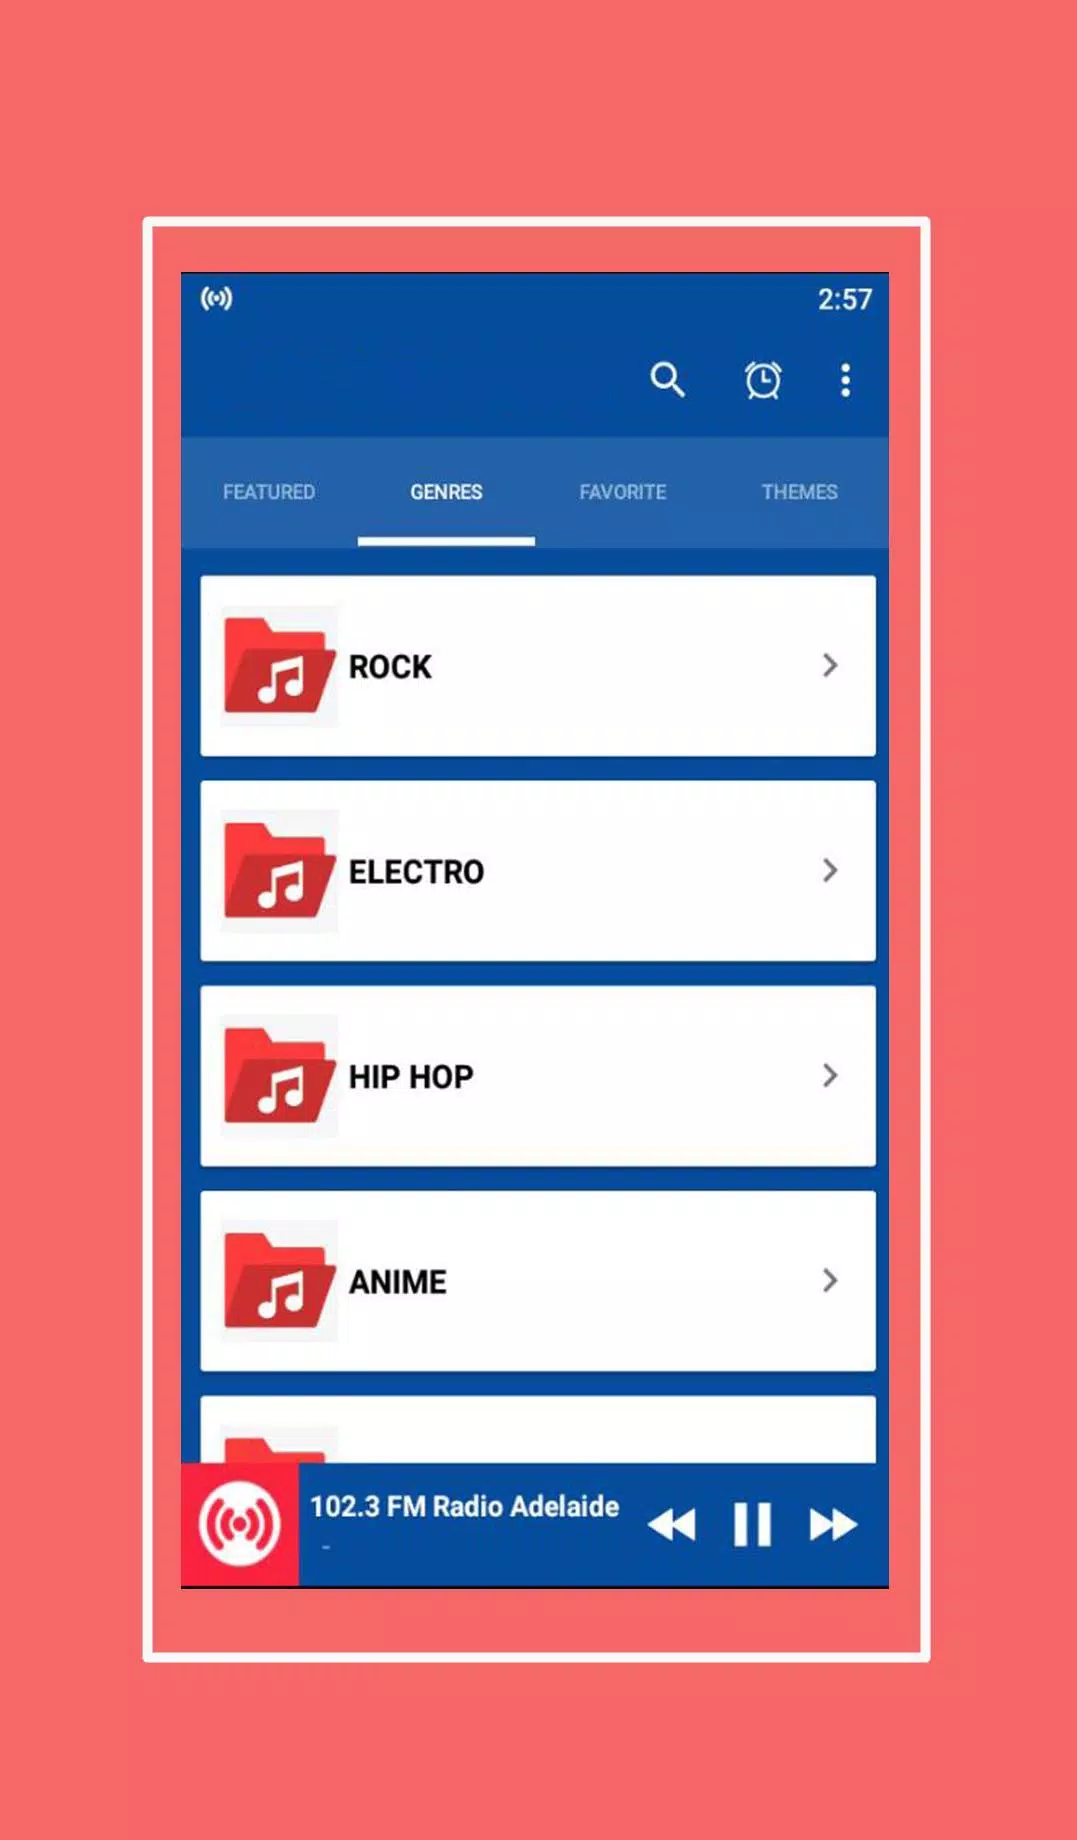 suryan fm radio 93.5 tamil for Android - APK Download